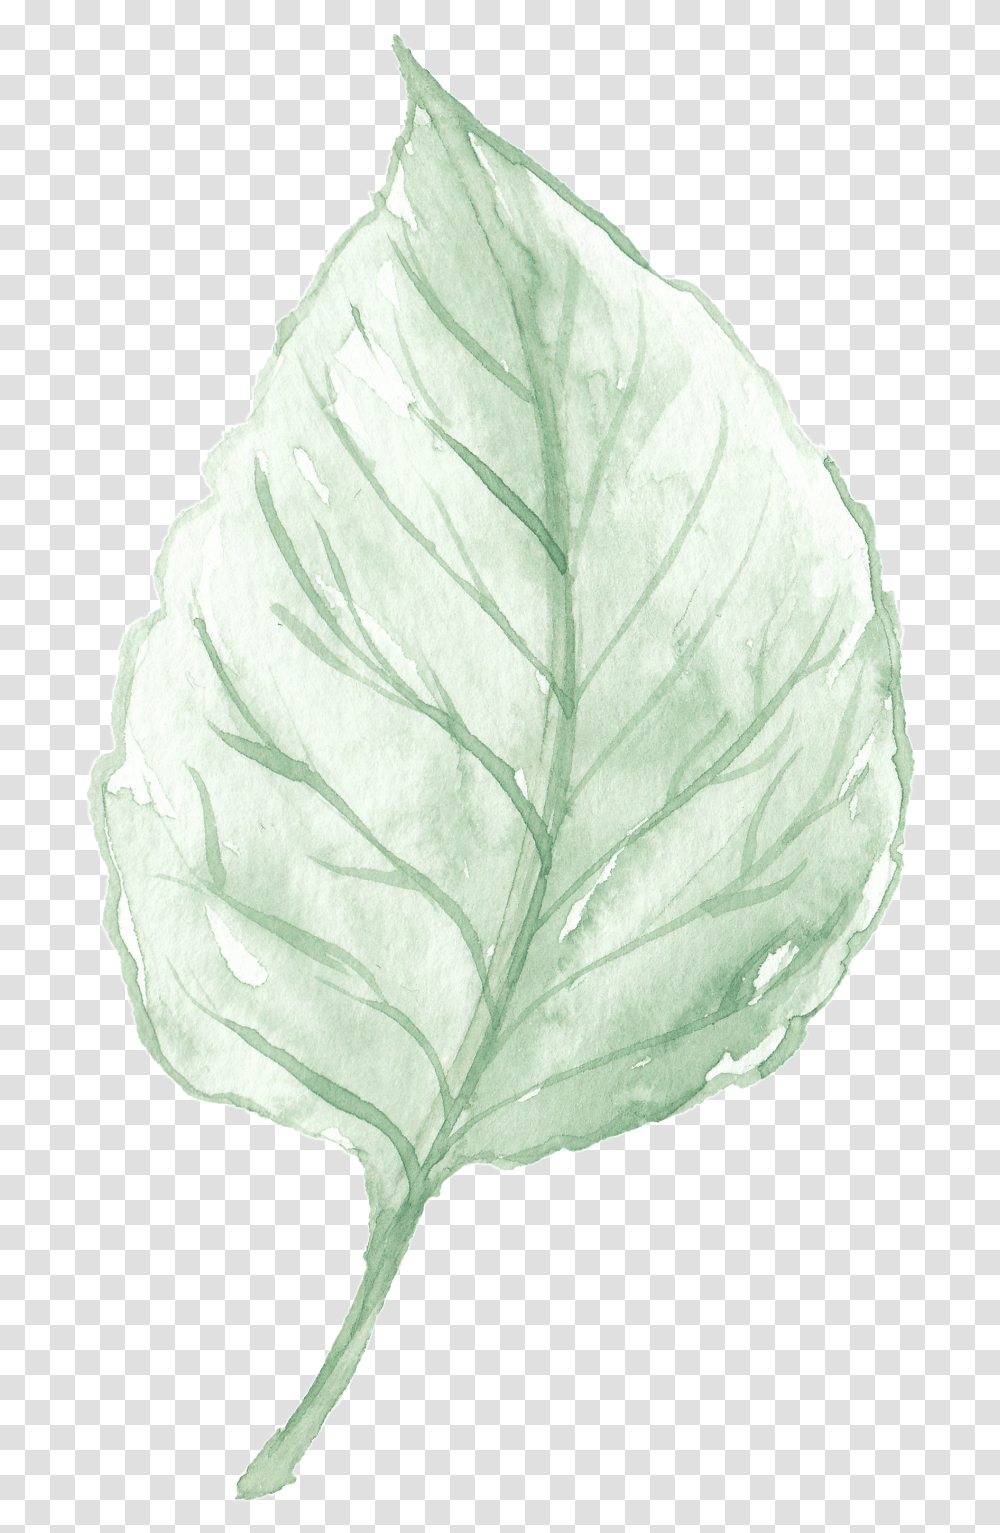 Watercolor Leaves Are Free From Material, Leaf, Plant, Jar, Potted Plant Transparent Png